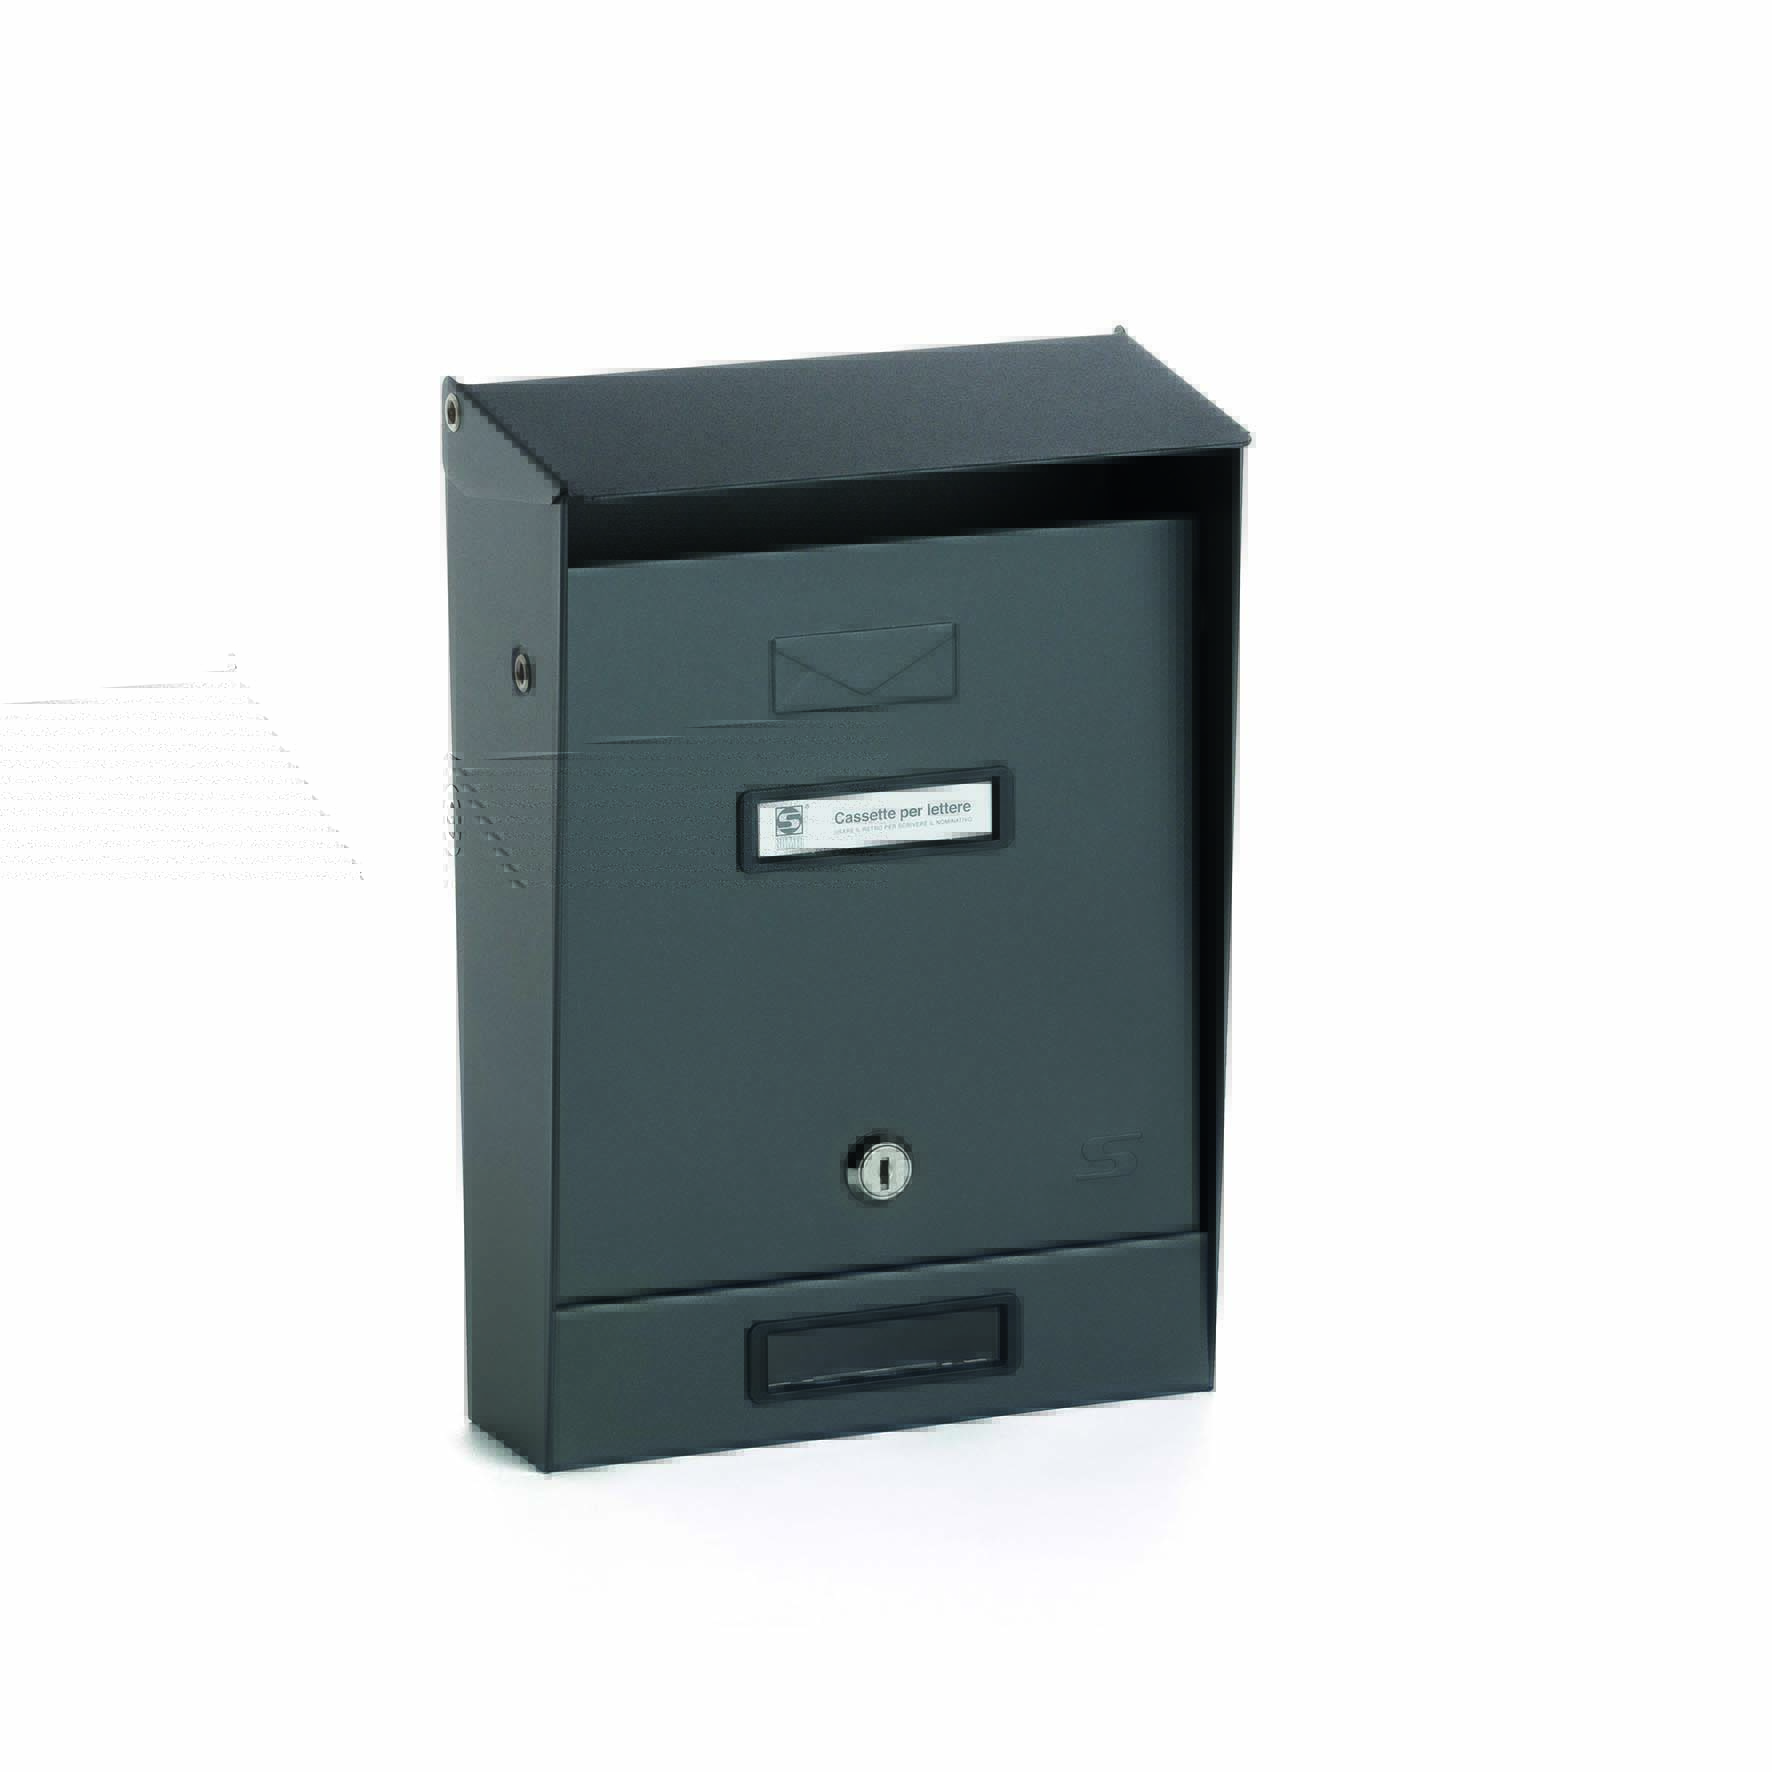 S01 letterbox with openable weather shield